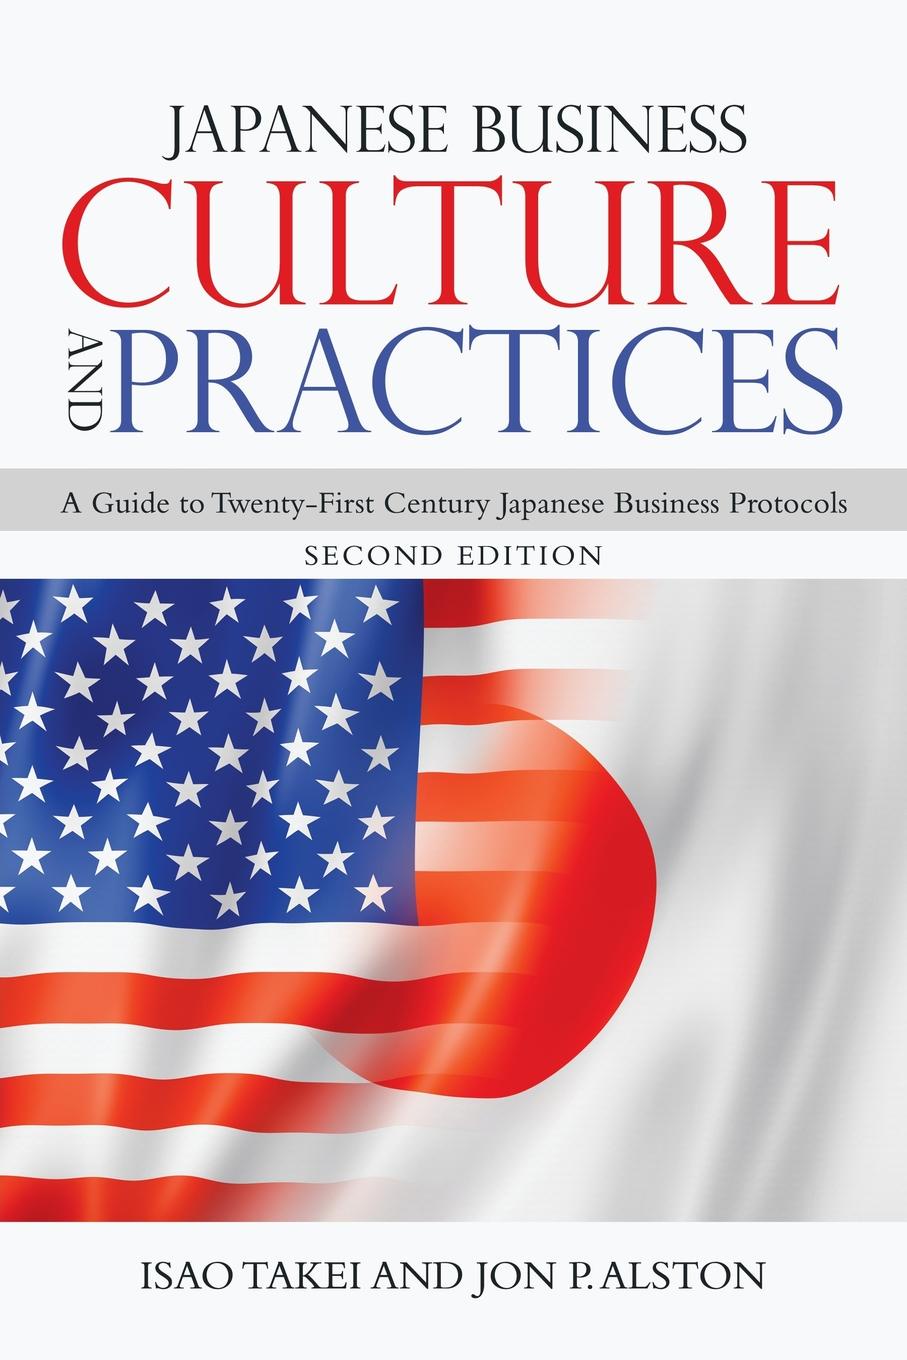 Japanese Business Culture and Practices. A Guide to Twenty-First Century Japanese Business Protocols